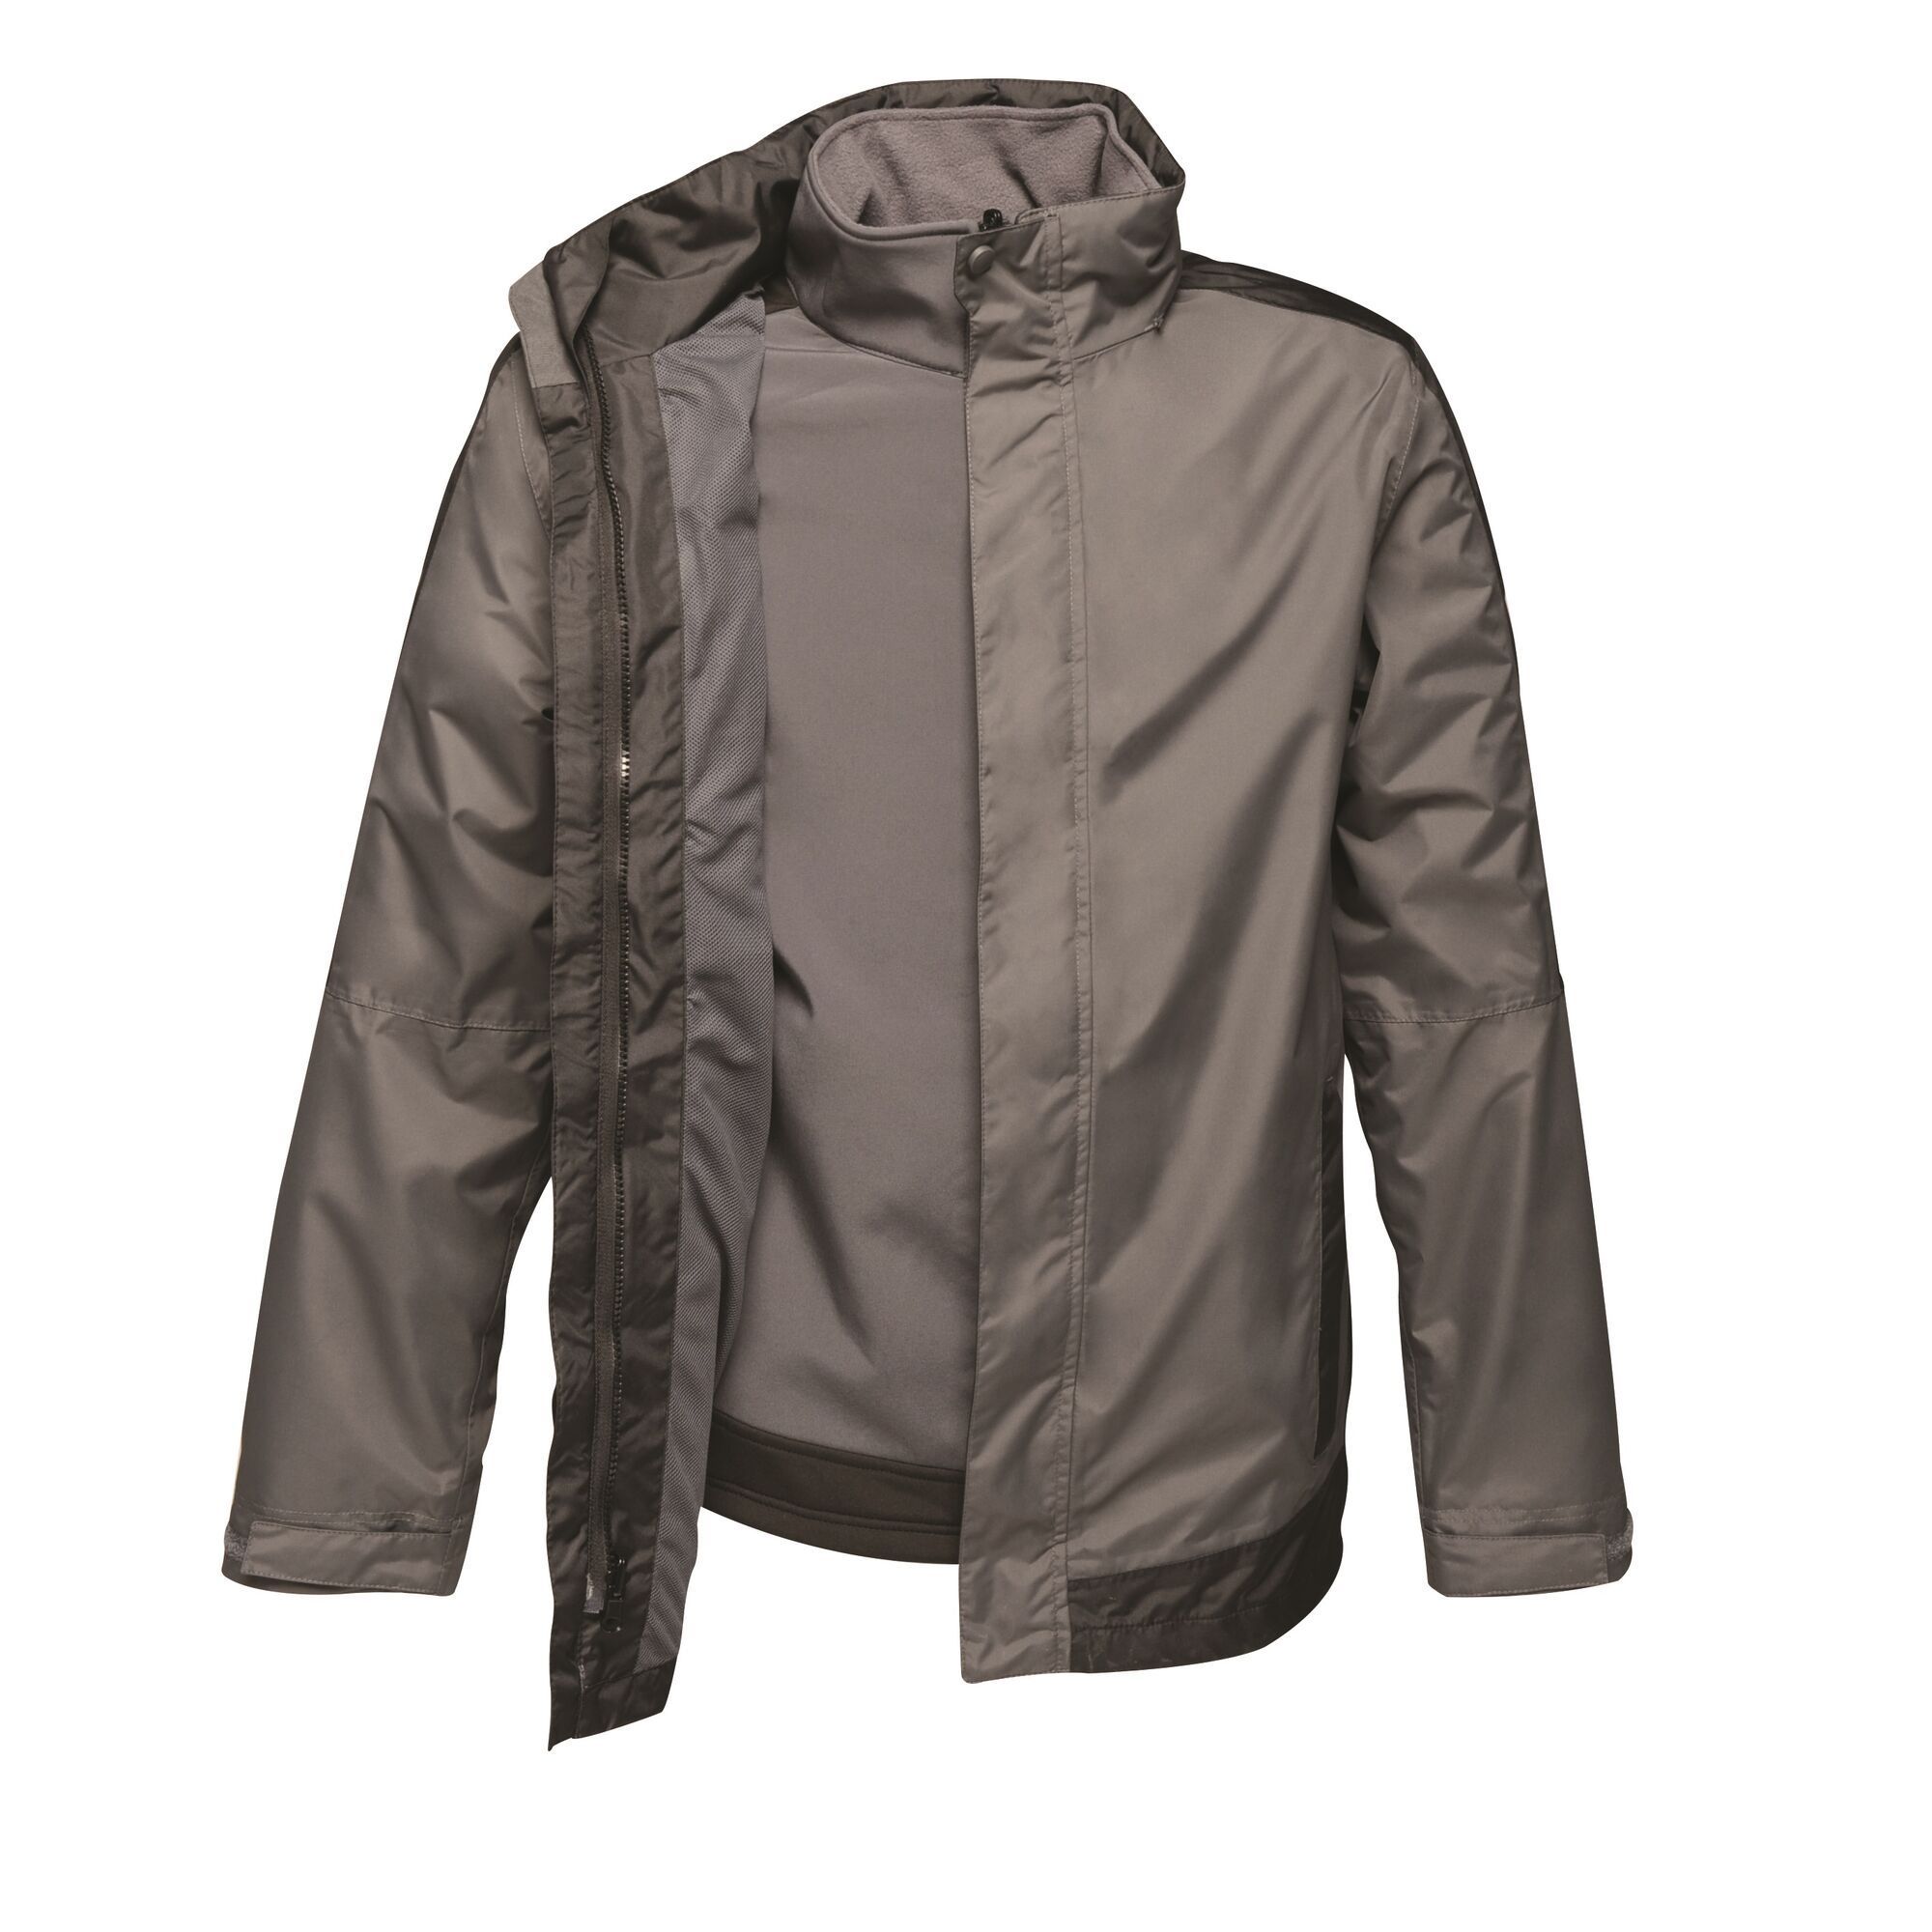 Waterproof and breathable Isotex 10000 100% polyester. Part mesh, part polyester taffeta lining. Taped seams. Conforms to EN343:2003 A1:2007 Class 3:2. Concealed hood with adjusters. 2 zipped lower pockets and 1 zipped chest pocket. Adjustable cuffs and shockcord hem.